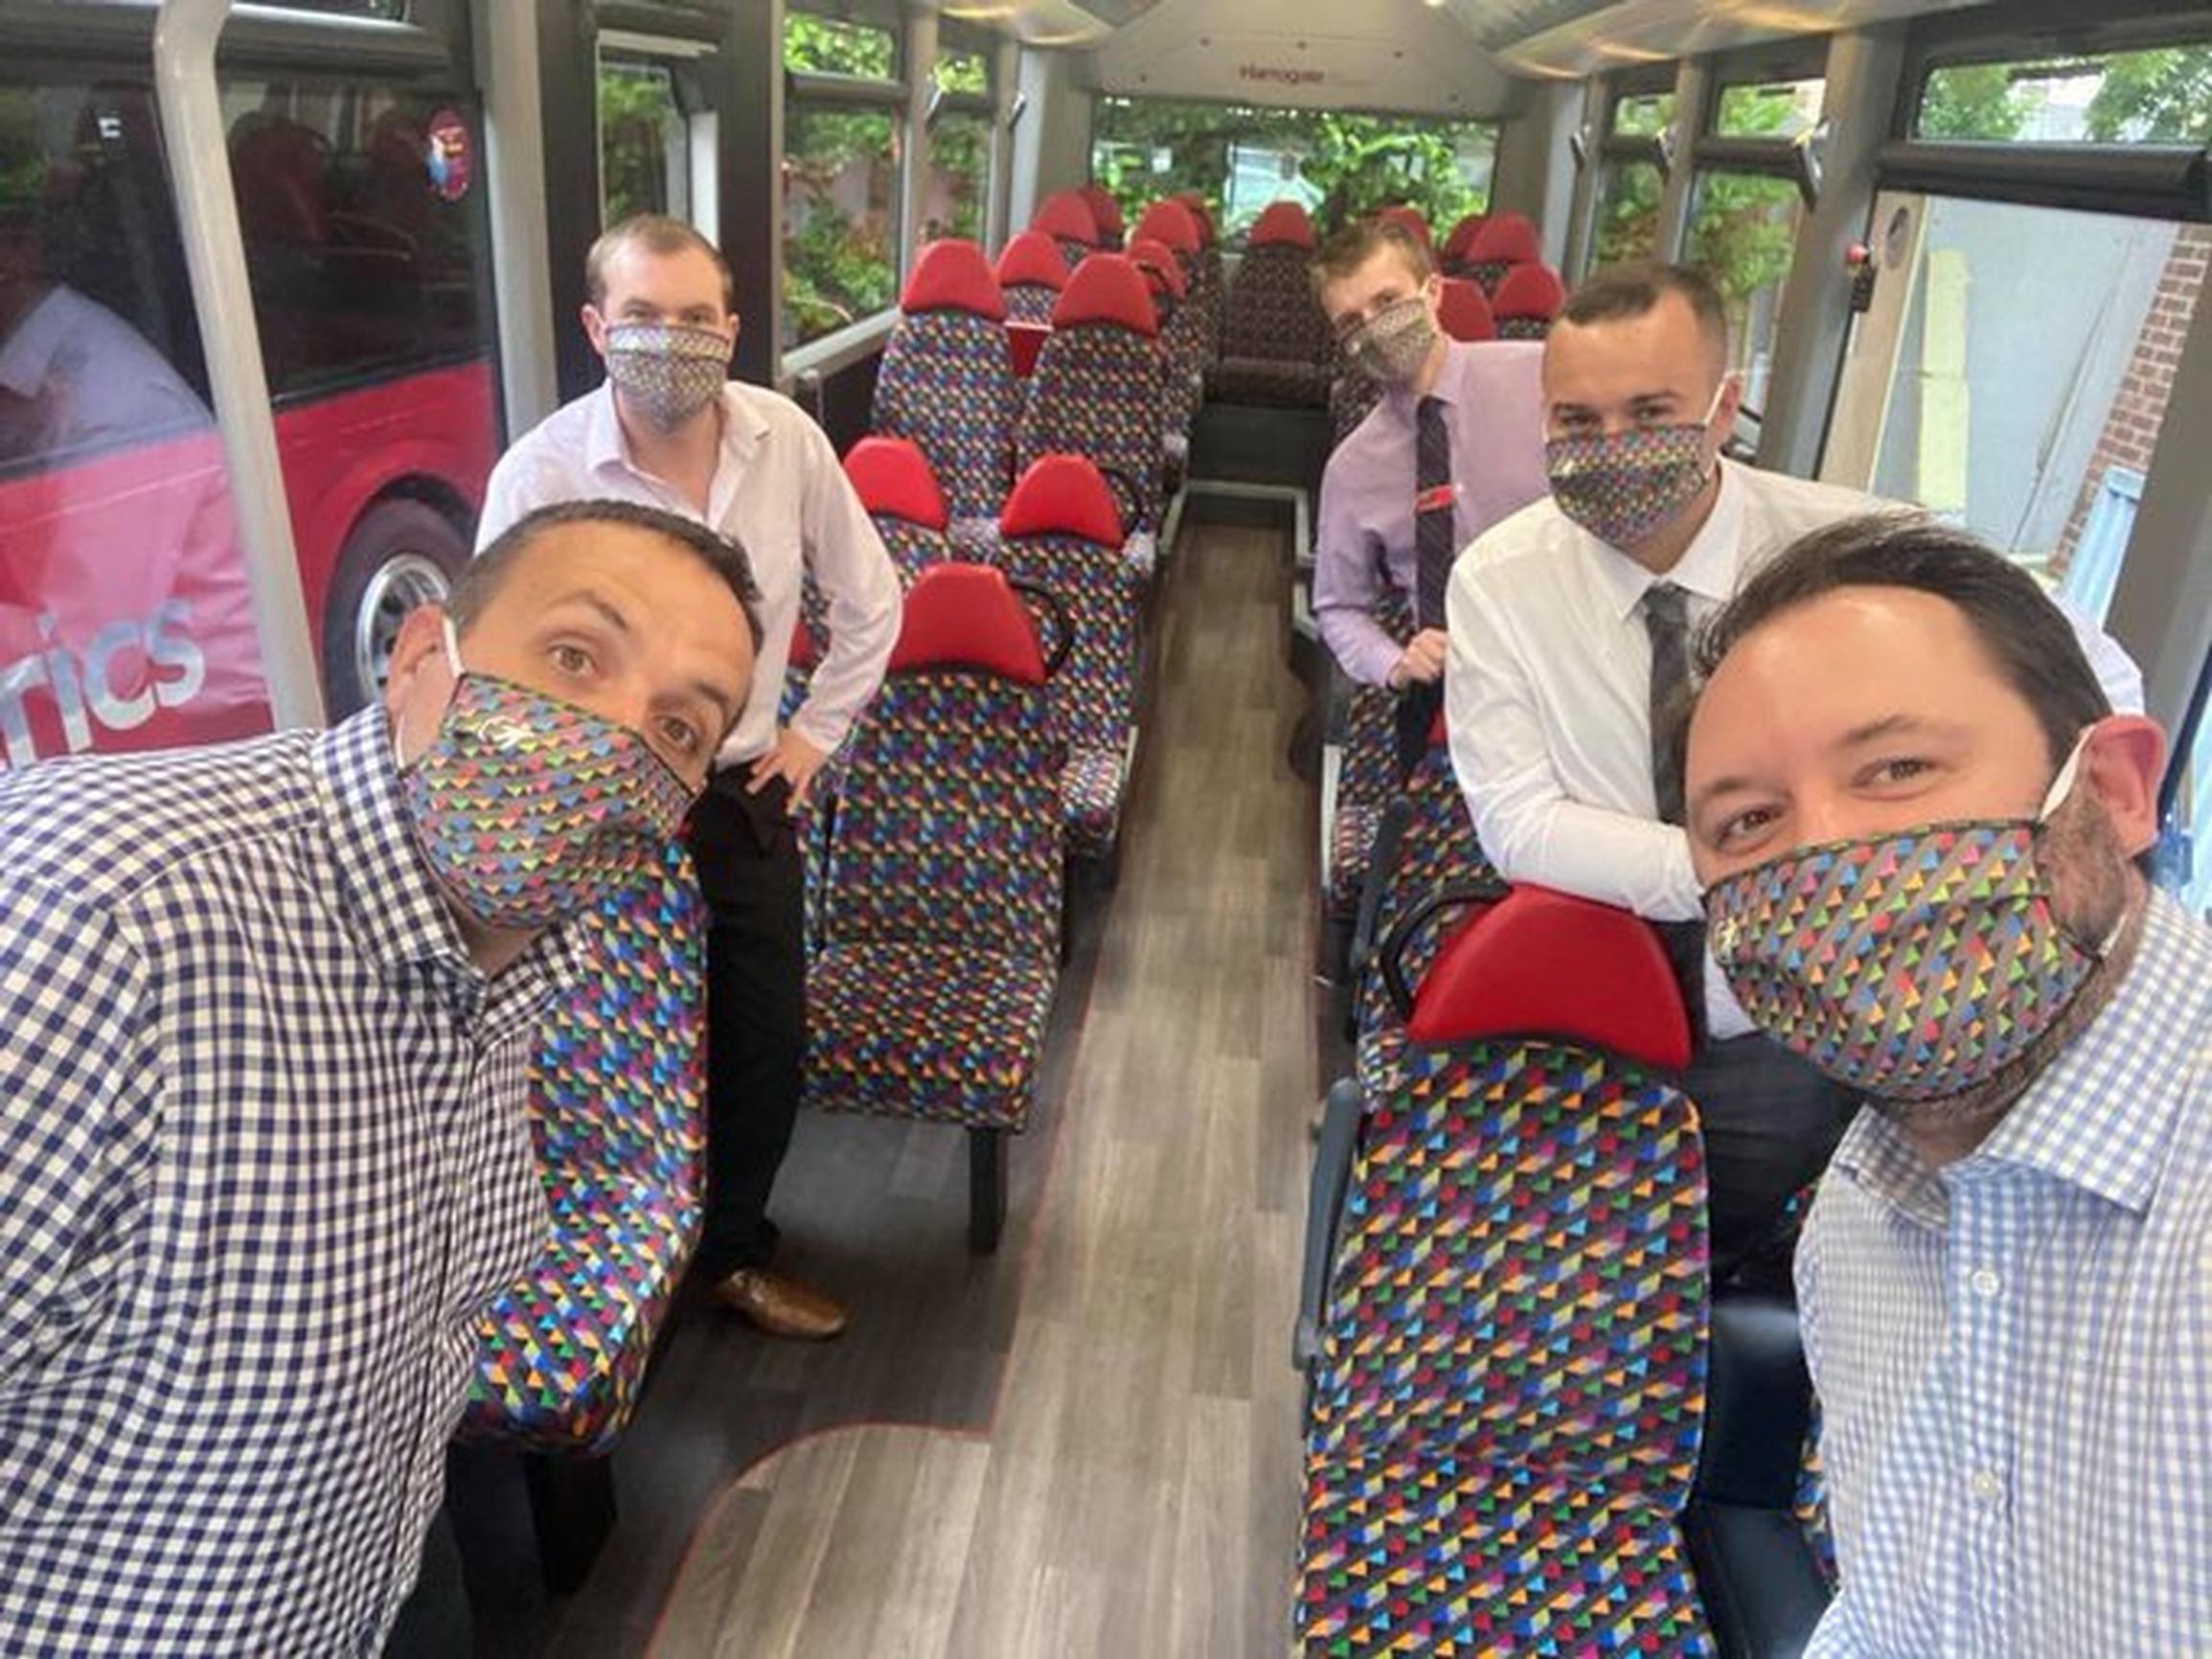 Transdev staff show off their multi-coloured face coverings